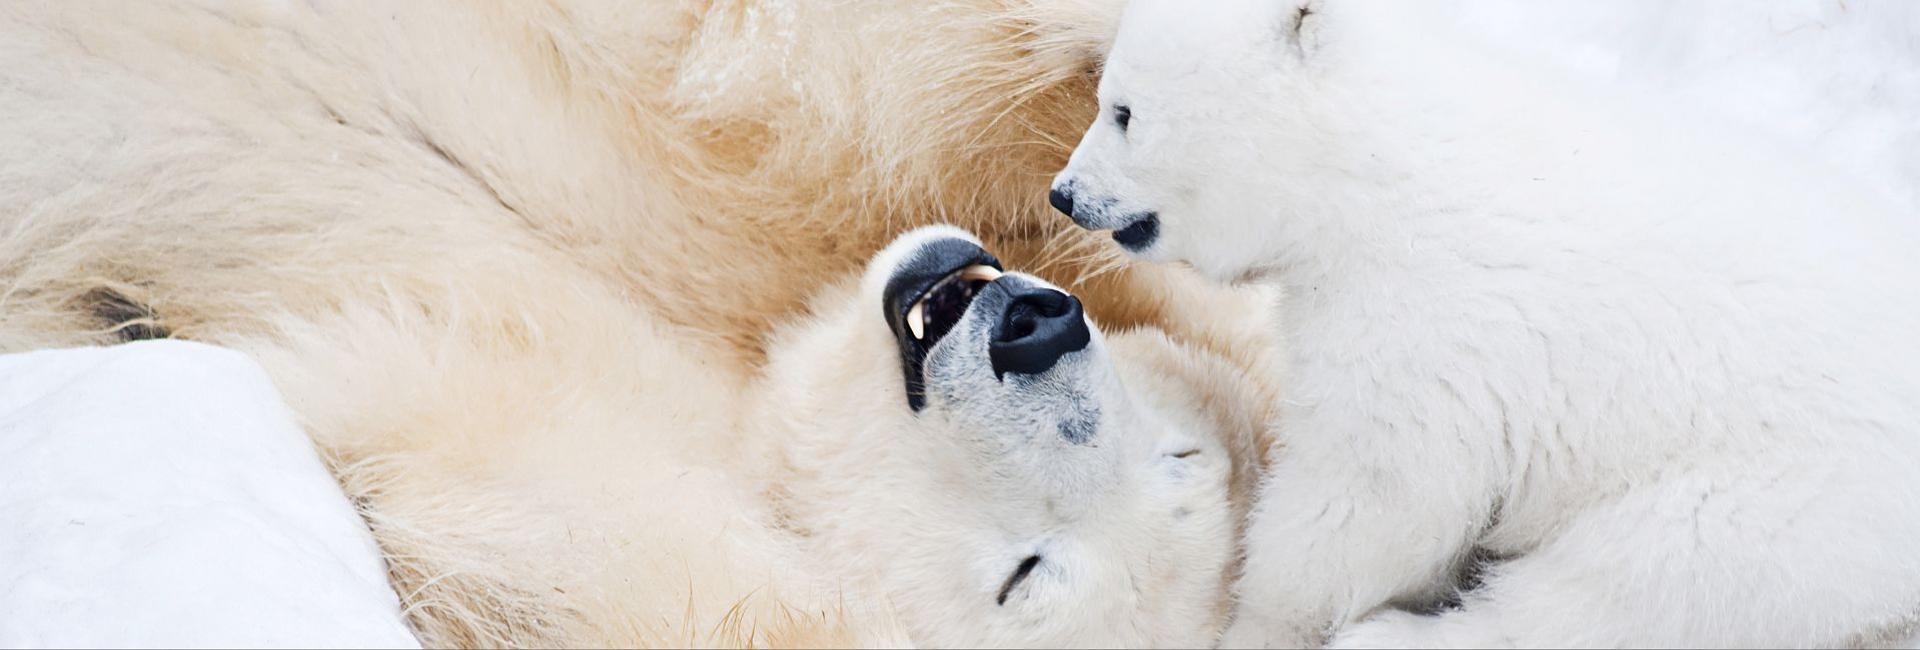 International Polar Bear Day  - See How You Could Make A Difference